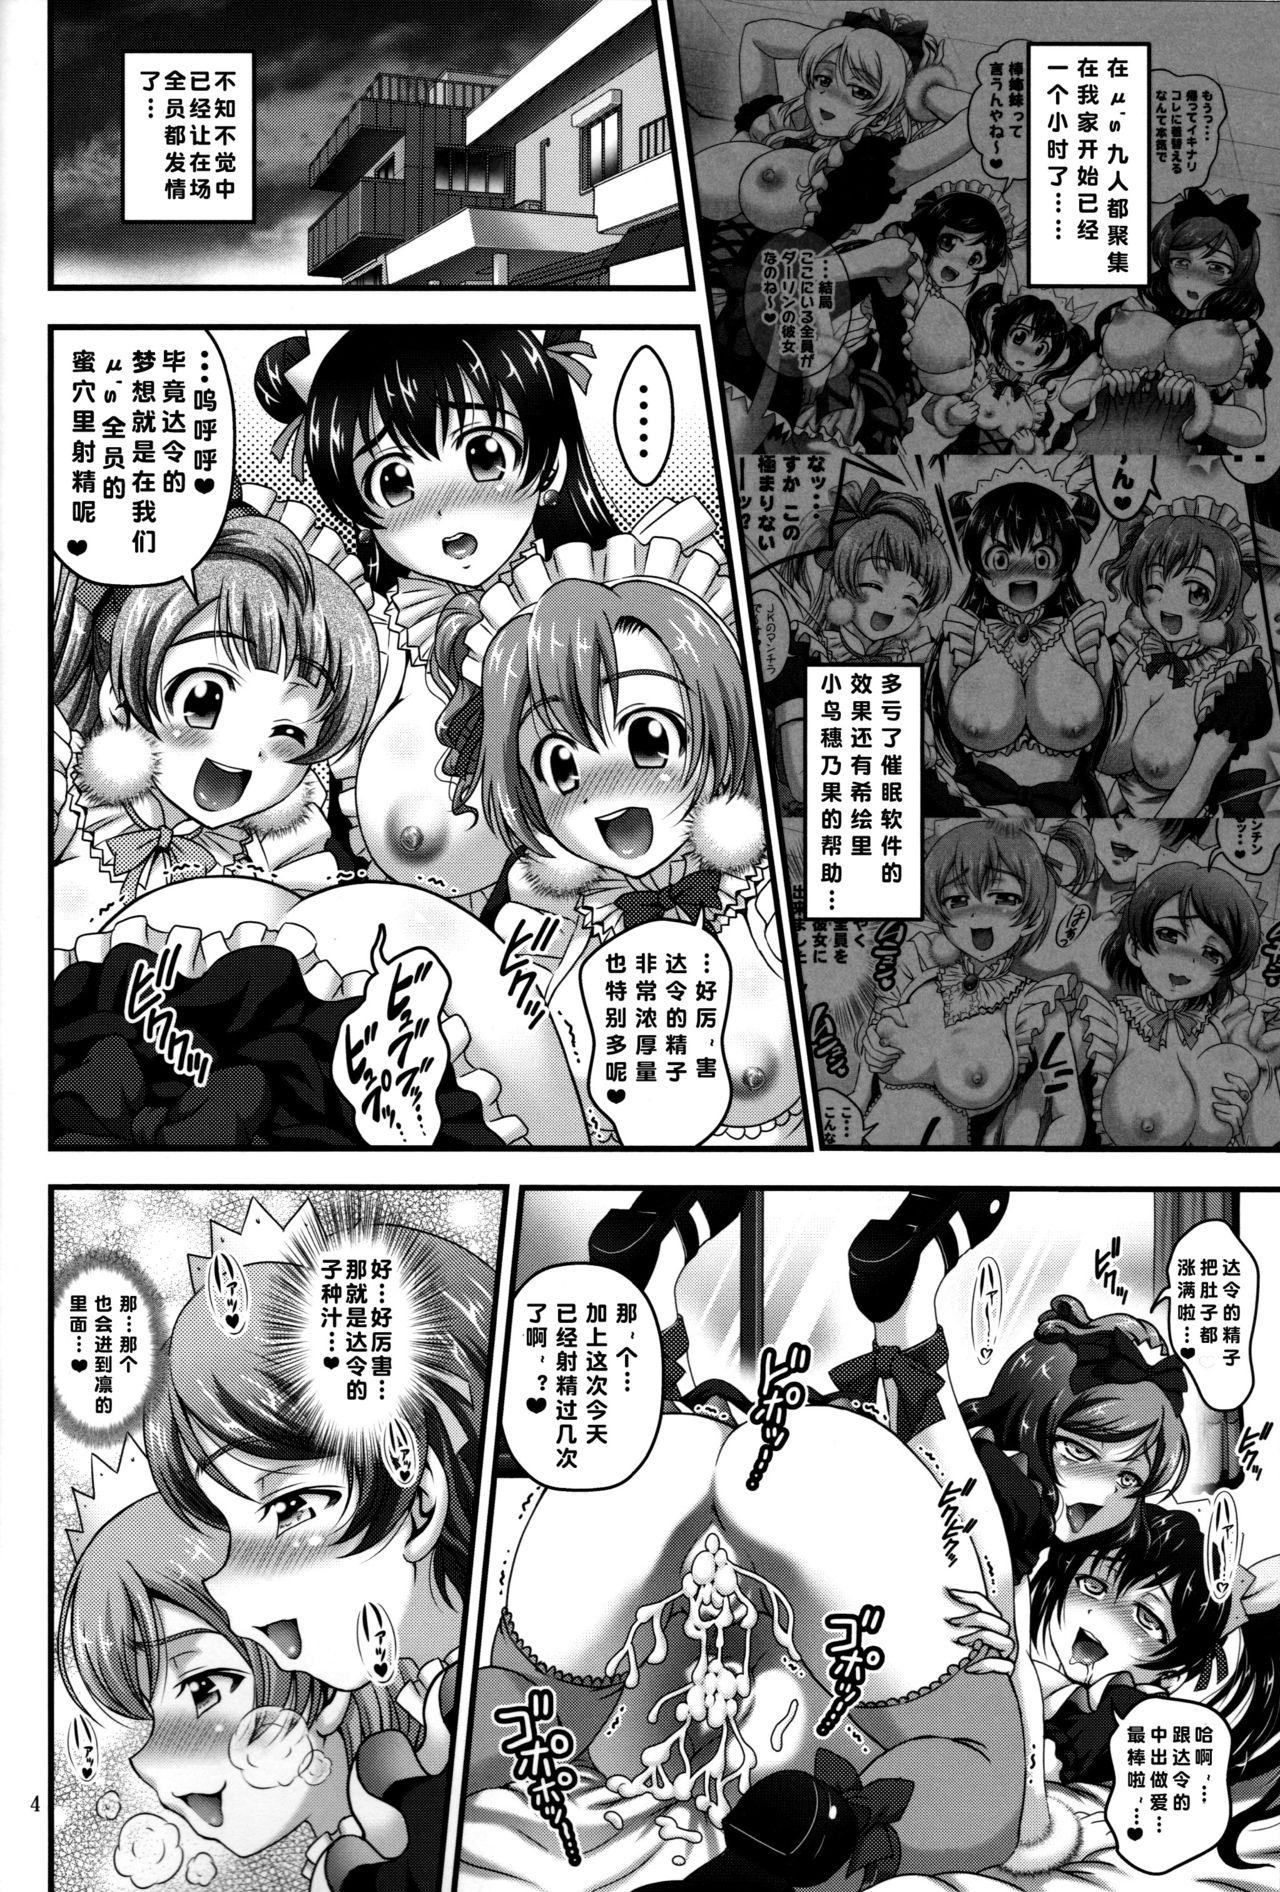 Family Roleplay Ore Yome Saimin 6 - Love live Cum In Mouth - Page 6